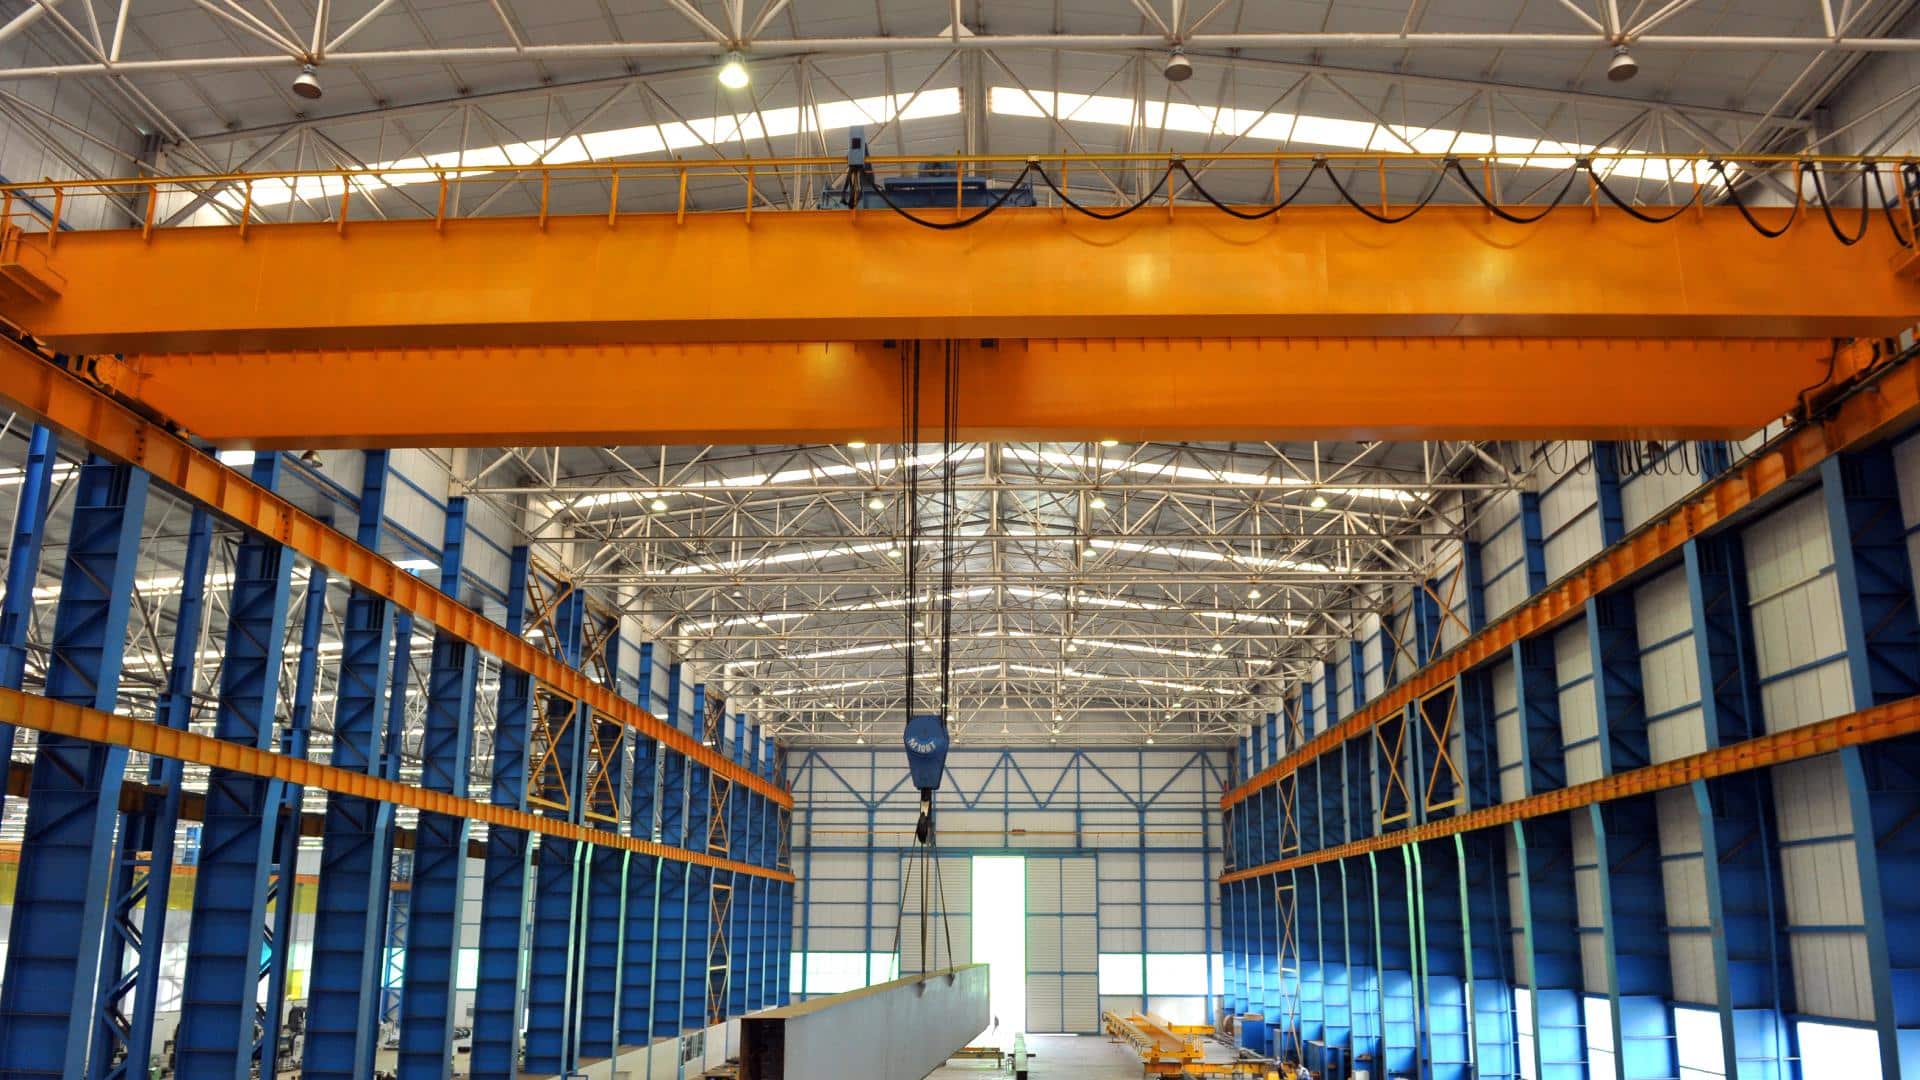 Static Busbar System: Conductor Bar Systems for Cranes